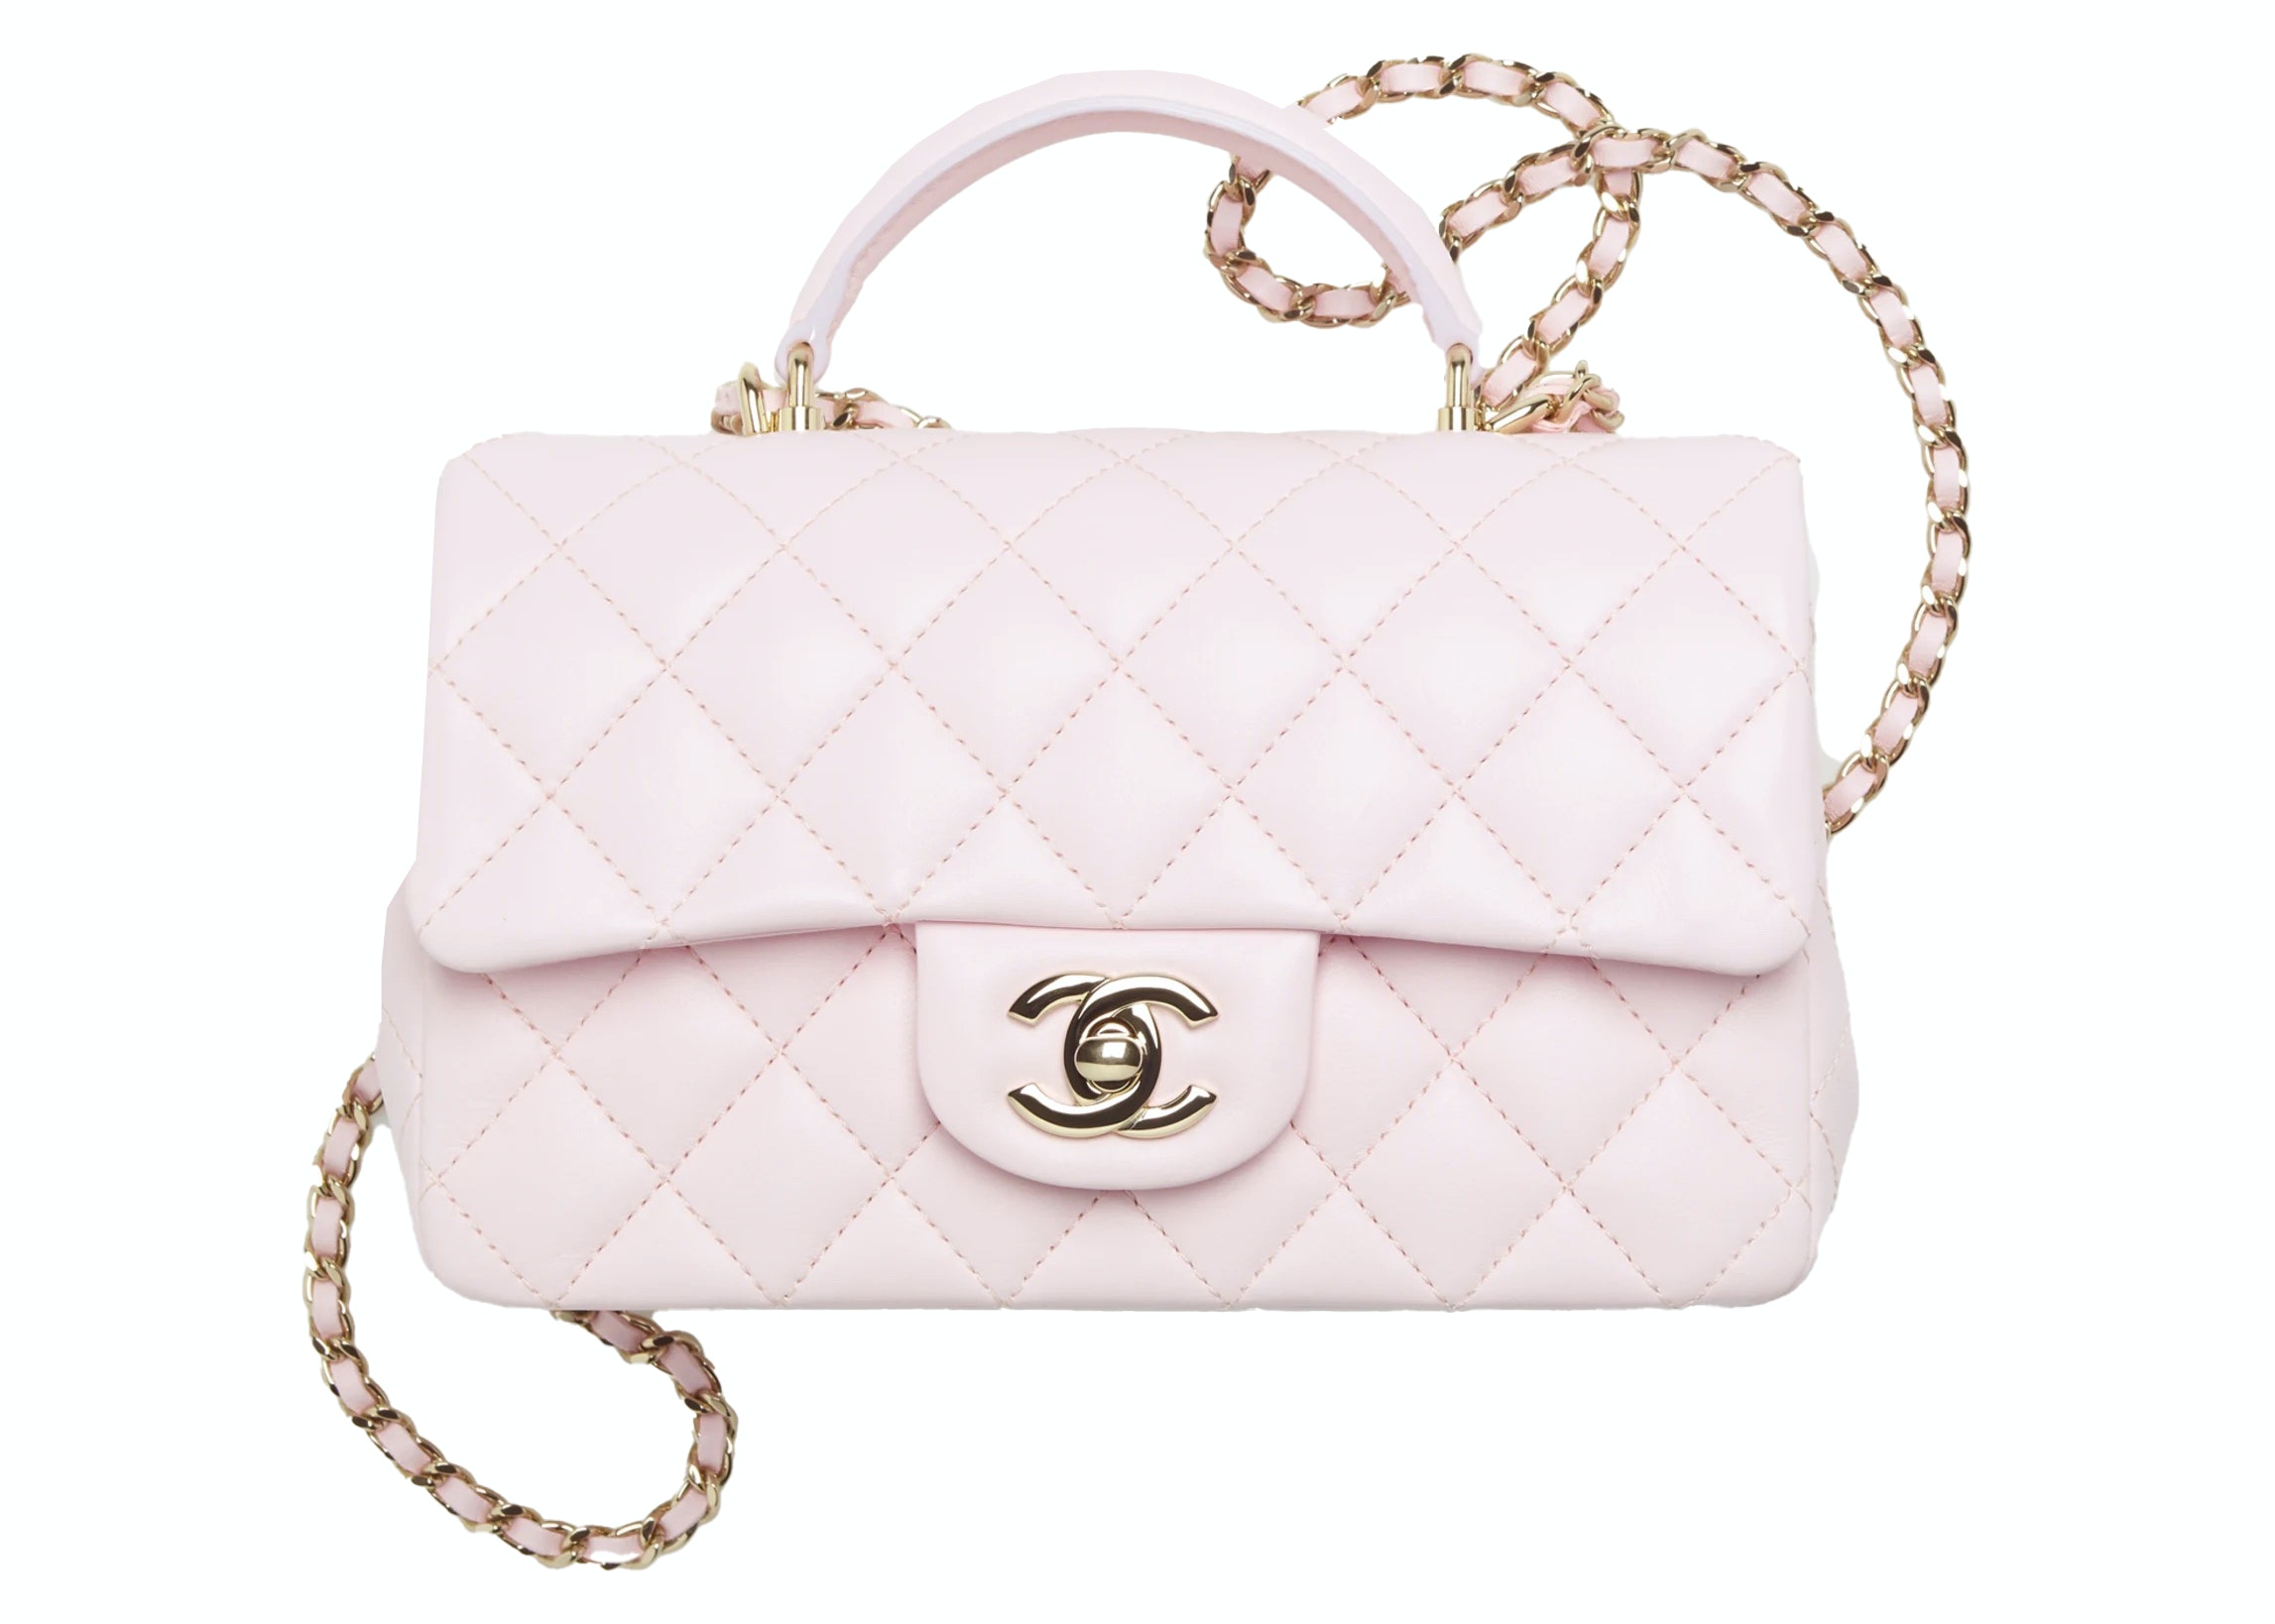 Chanel Mini Square Flap Bag Pink Iridescent Lambskin Silver Hardware   lupongovph